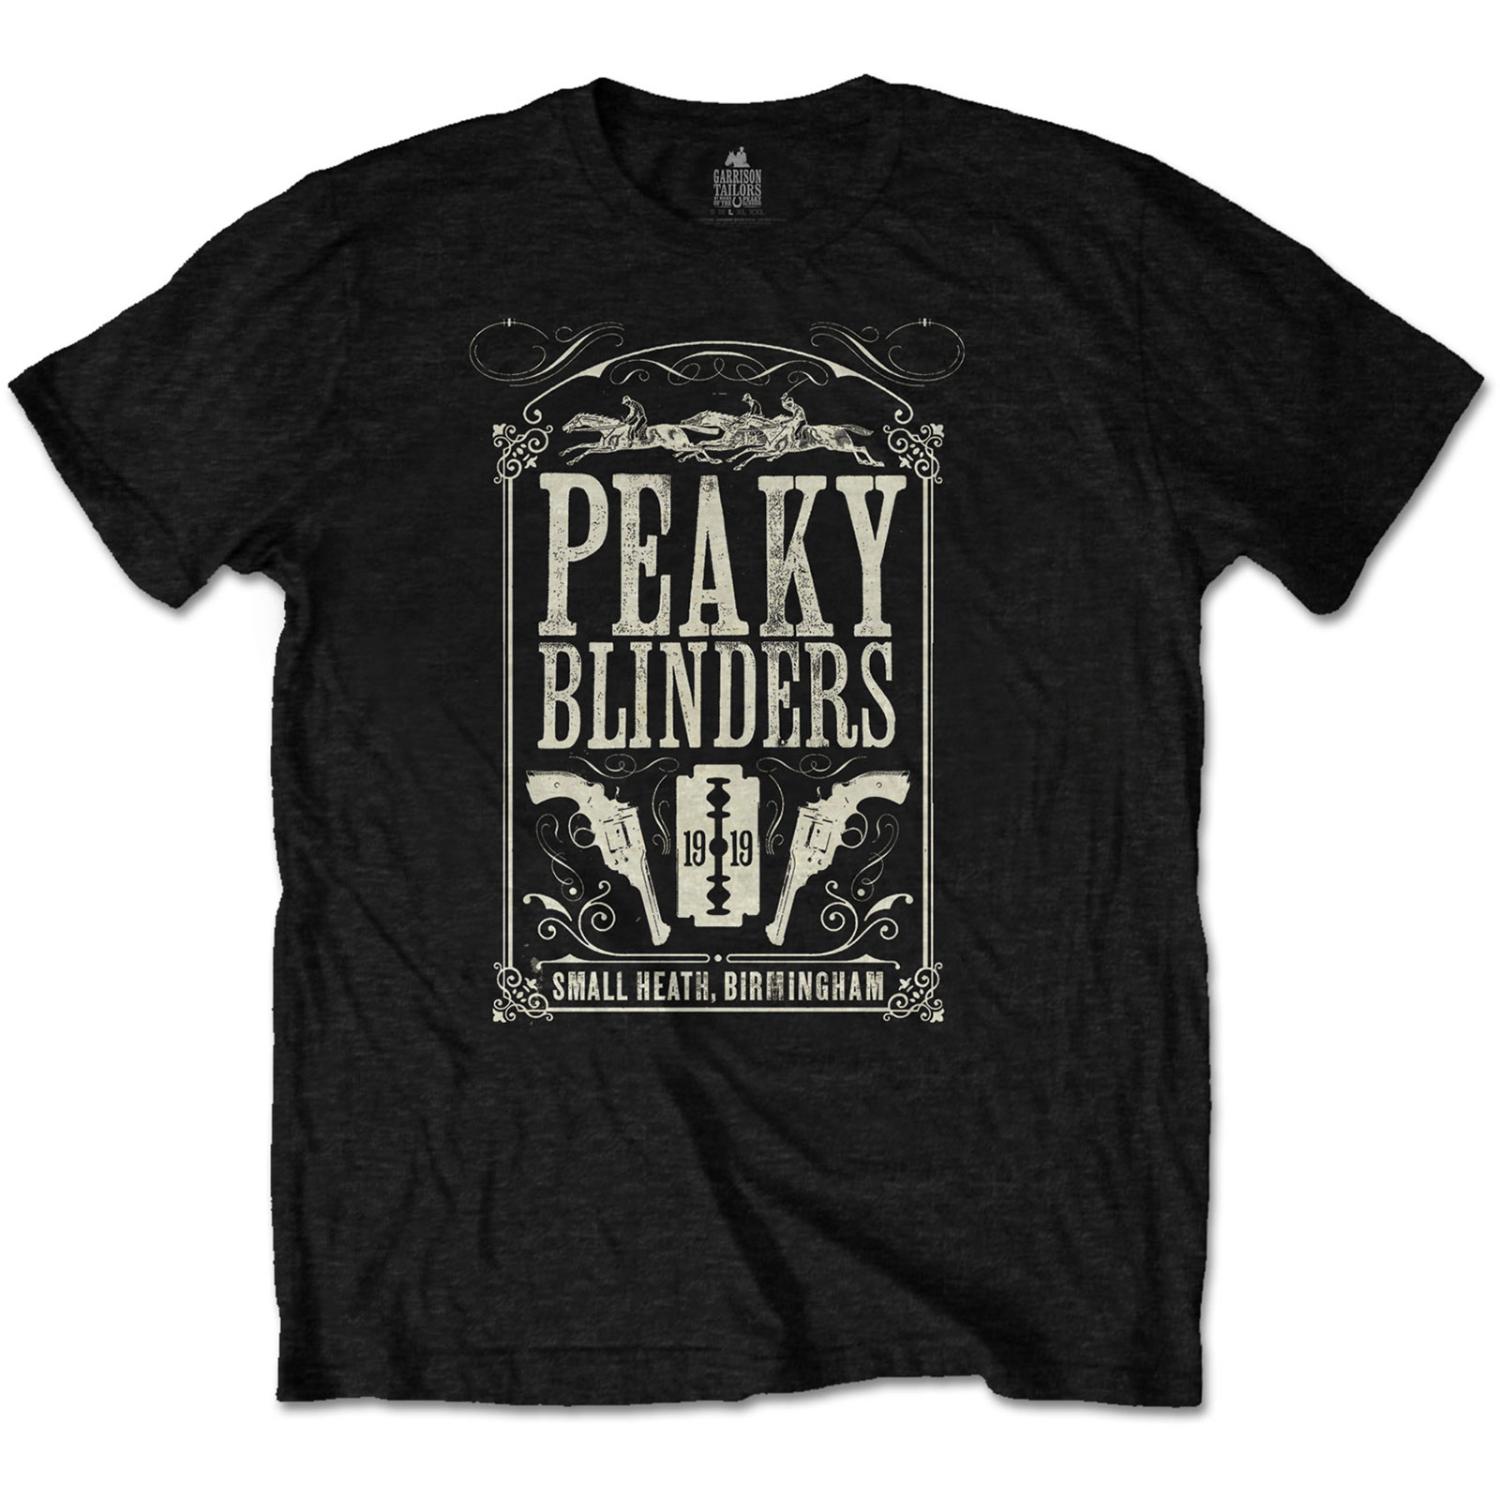 Peaky Blinders T-Shirt - Soundtrack